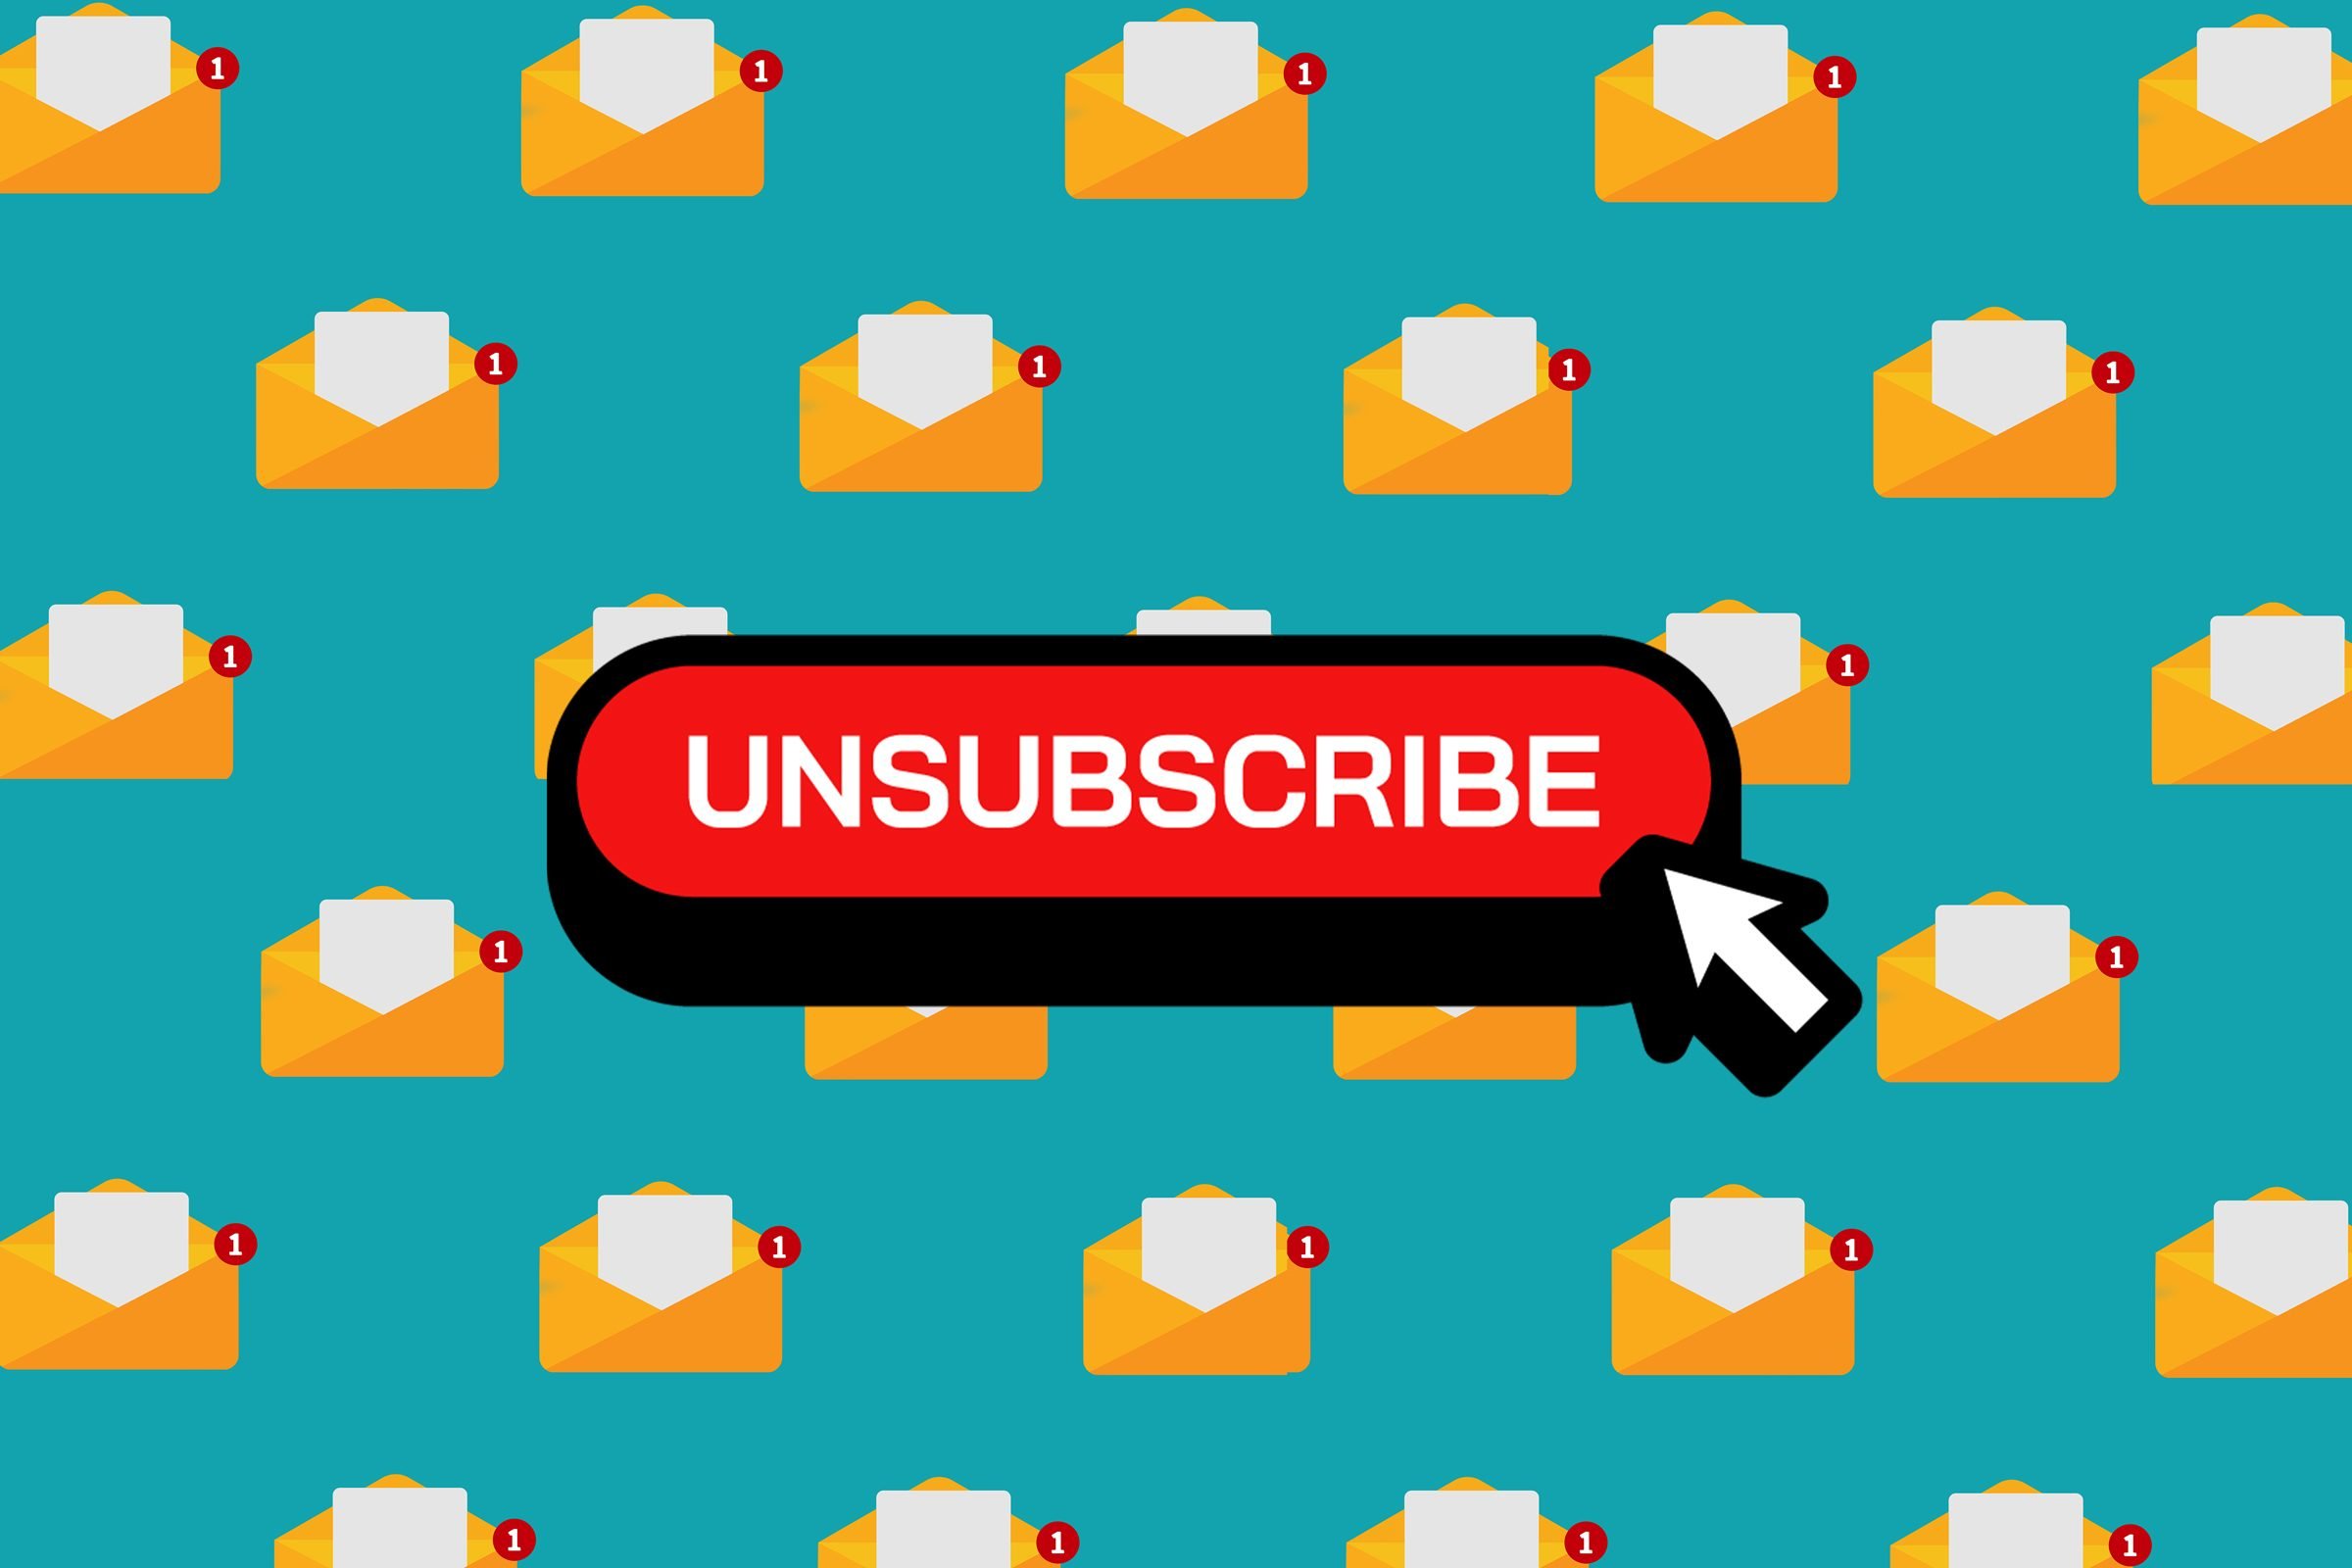 grid of email envelopes as the background with an unsubscribe button on top